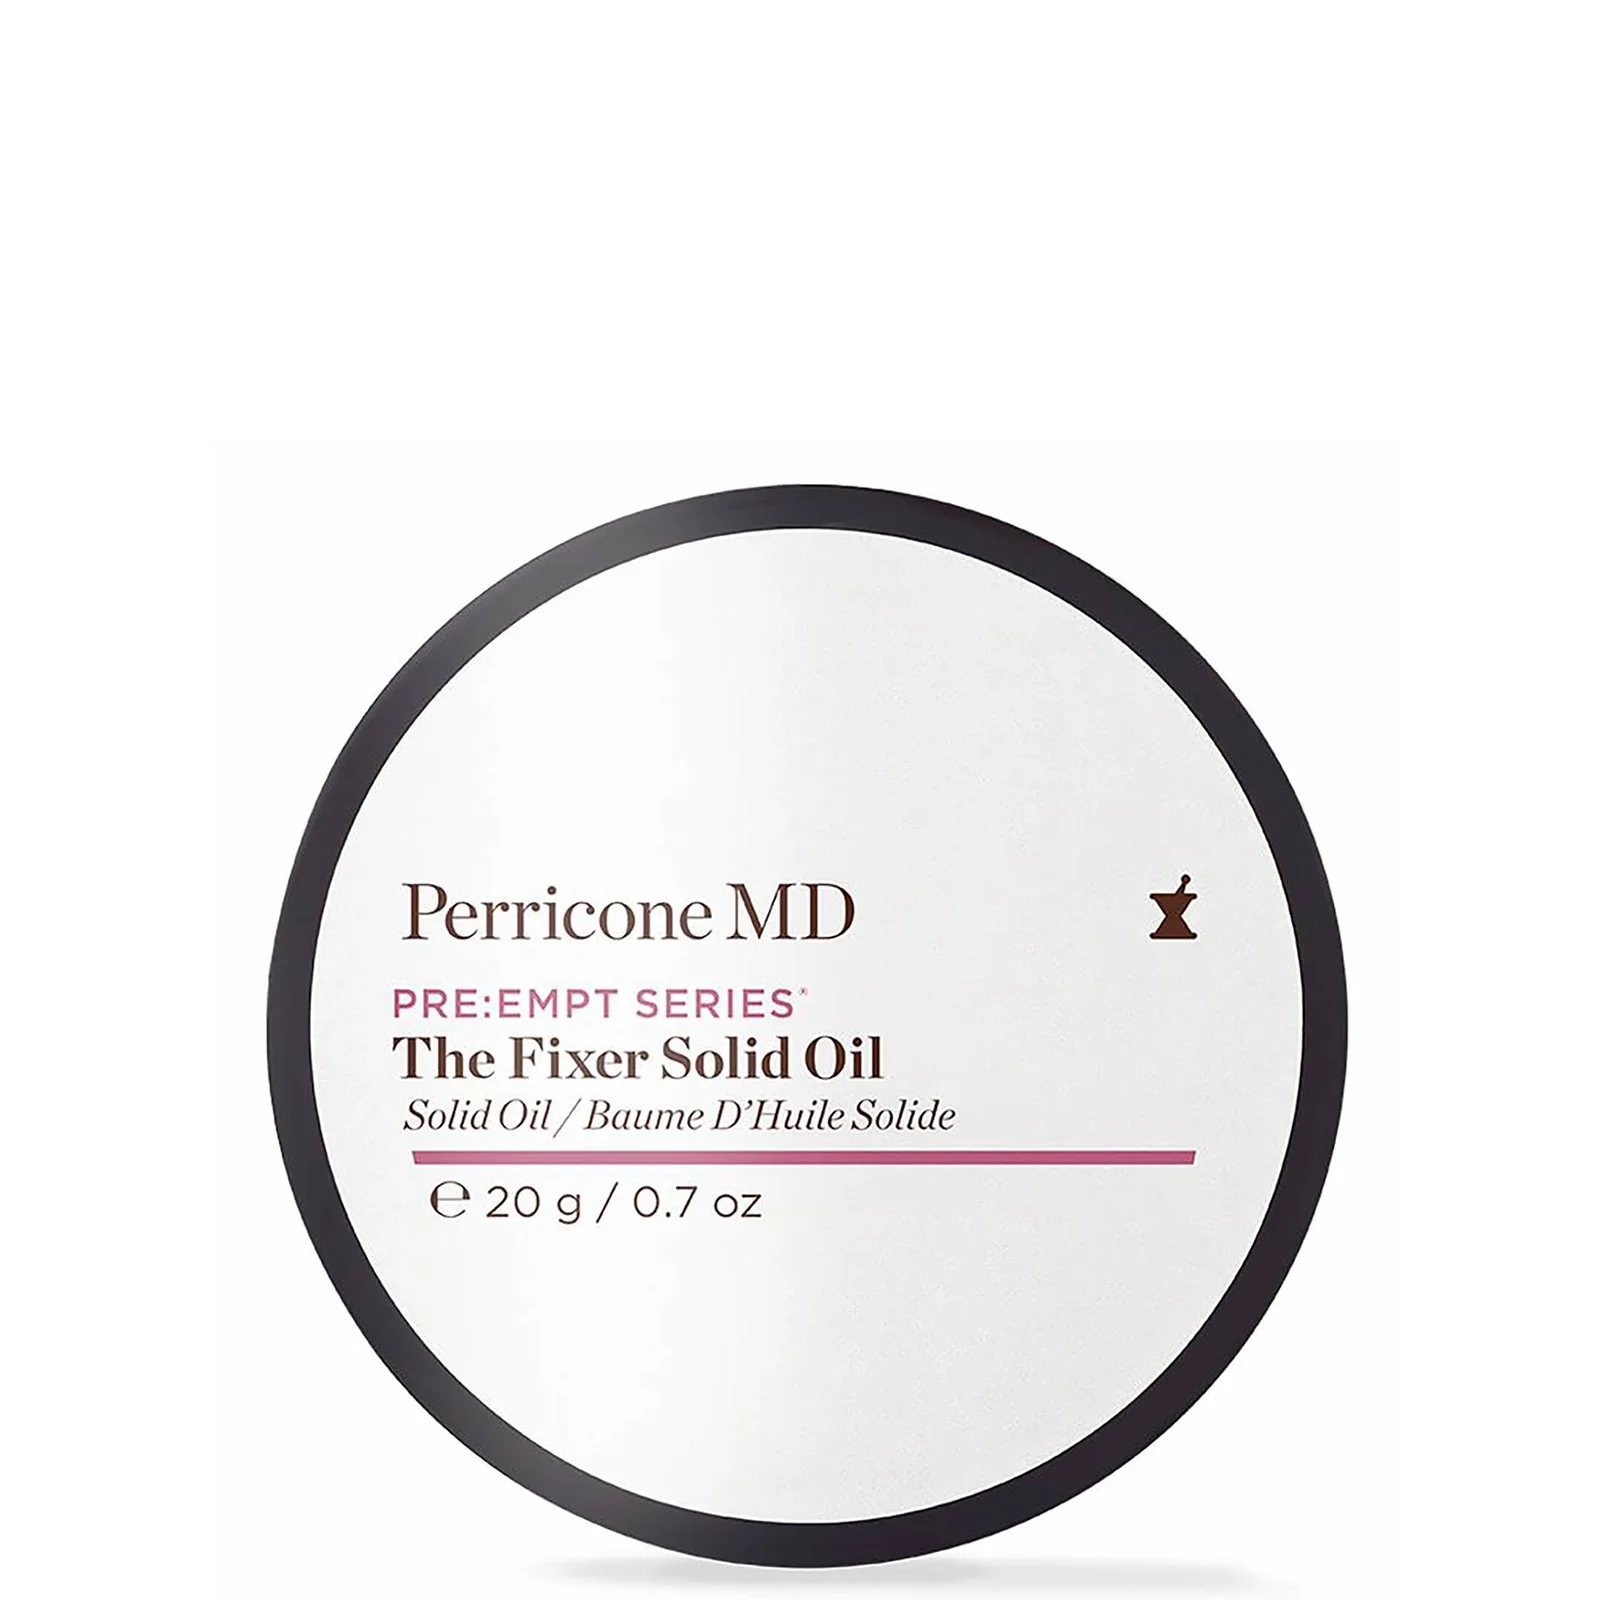 Perricone MD PRE:EMPT Solid Oil 20g Image 1